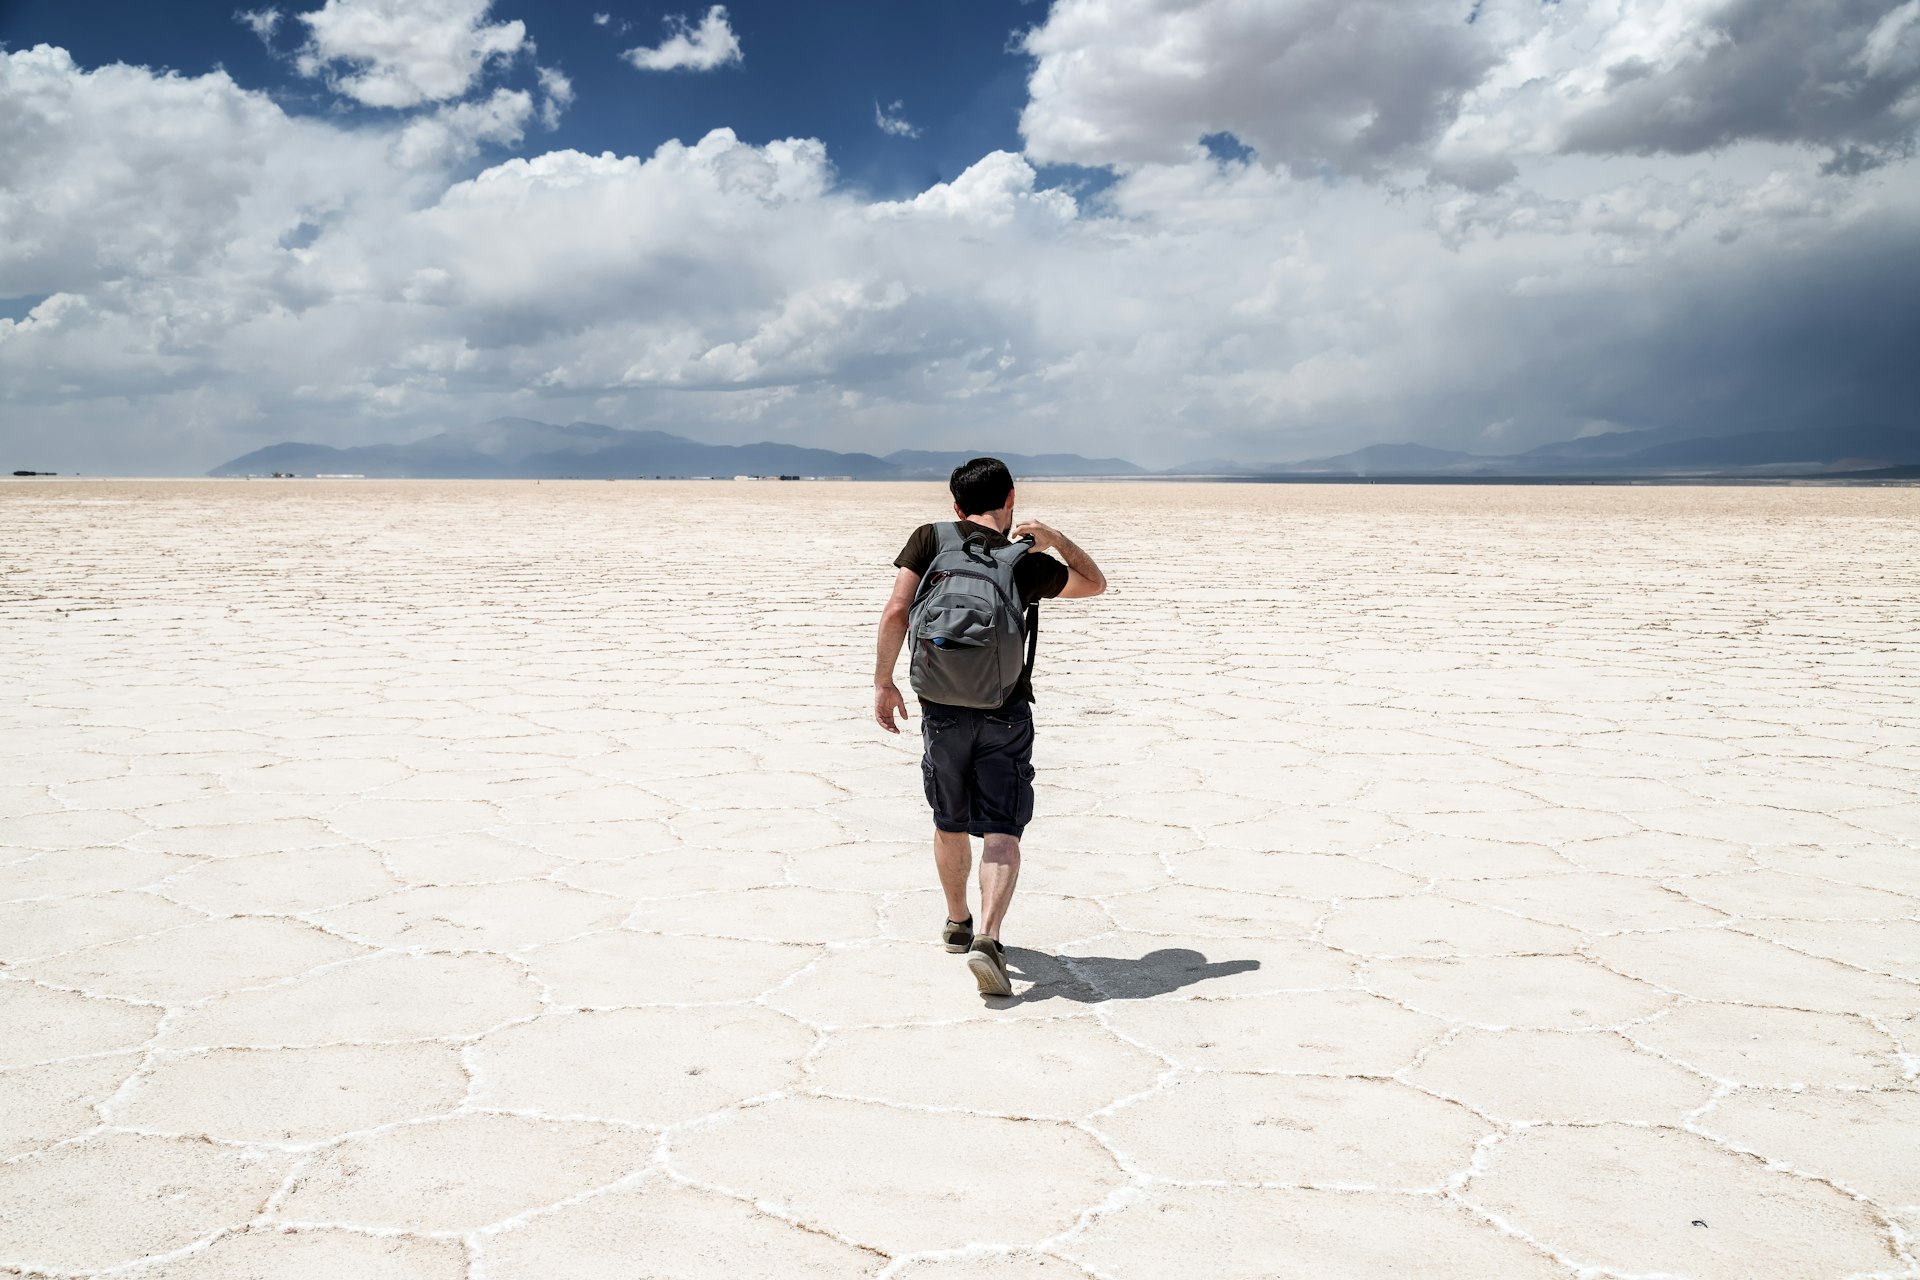 A solitary figure walks out on vast salt flats, white flat land streching featureless into the distance